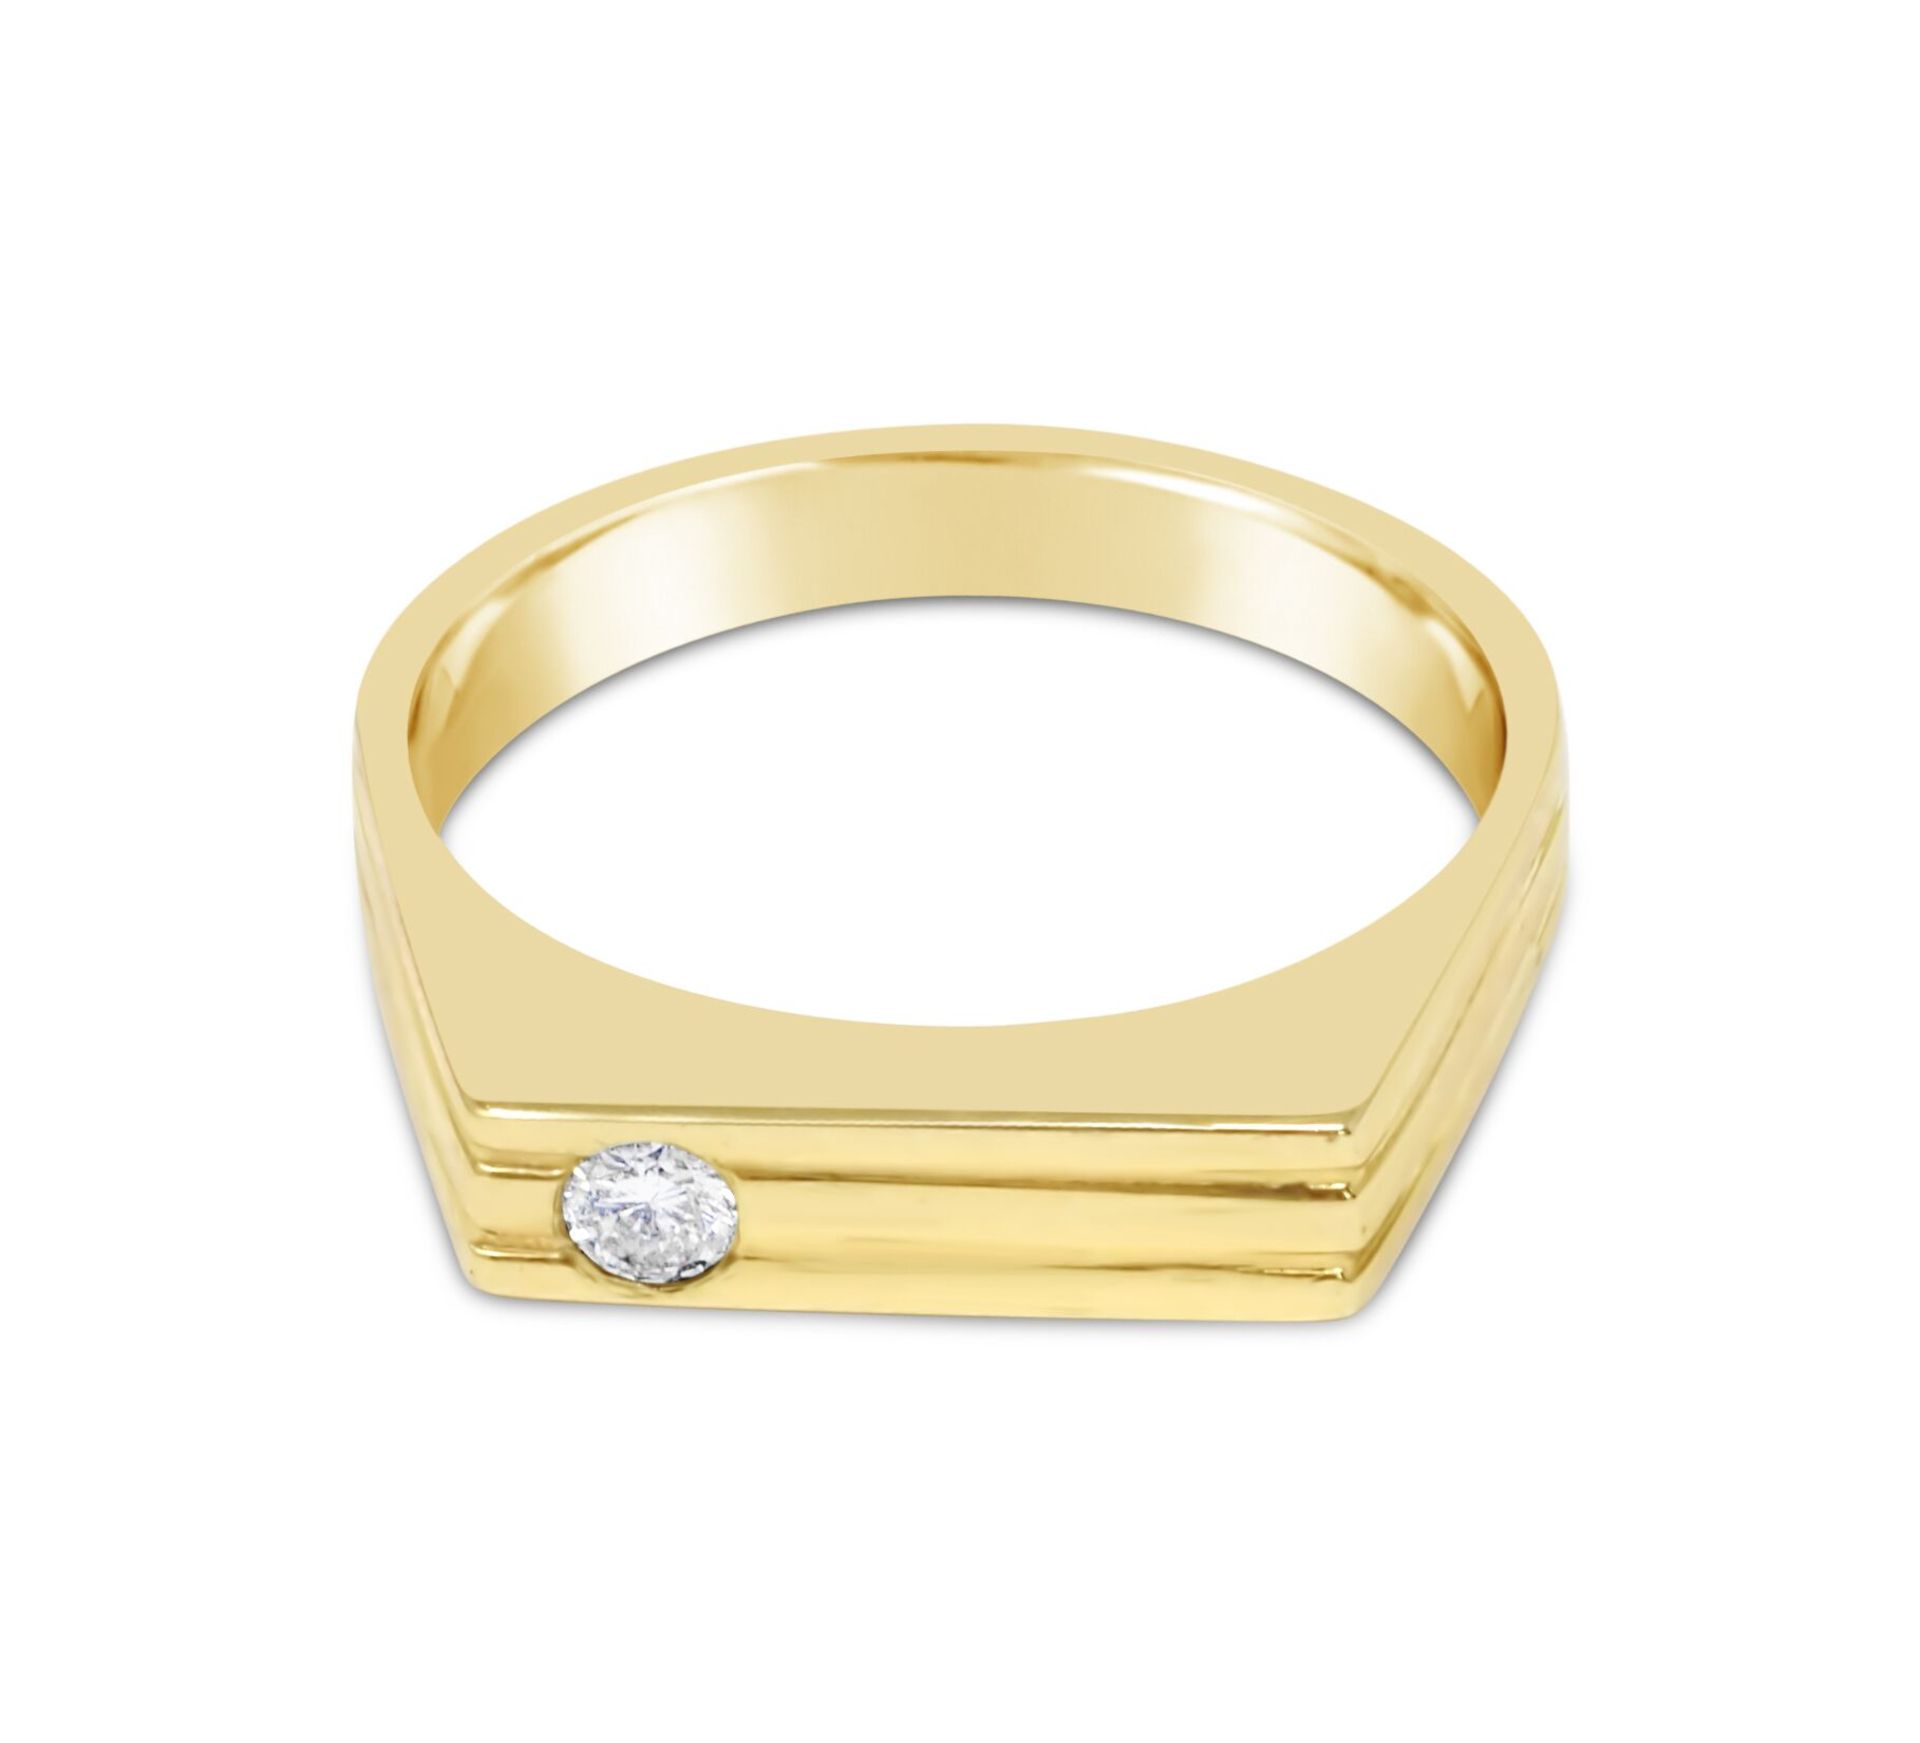 Diamond Ring, 9ct Yellow Gold, RRP £699 Weight 3.19g, Diamond Weight 0.08ct, Colour H, Clarity SI1 -